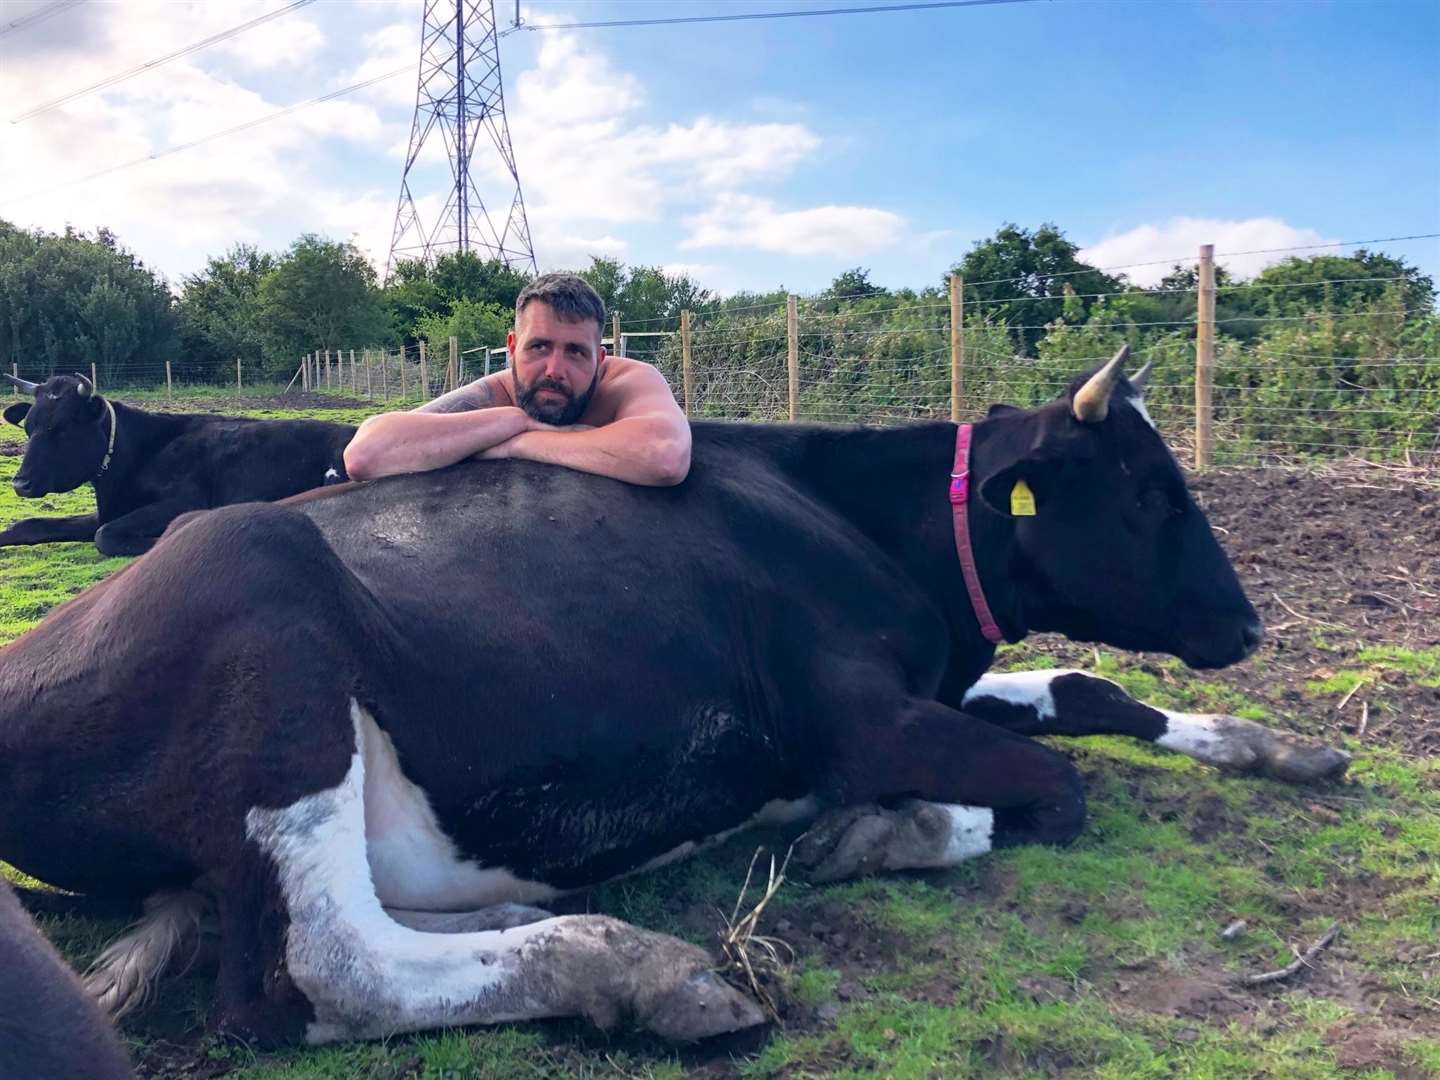 Amey James's partner Phil Greenhalgh with a cow at The Happy Pants Ranch